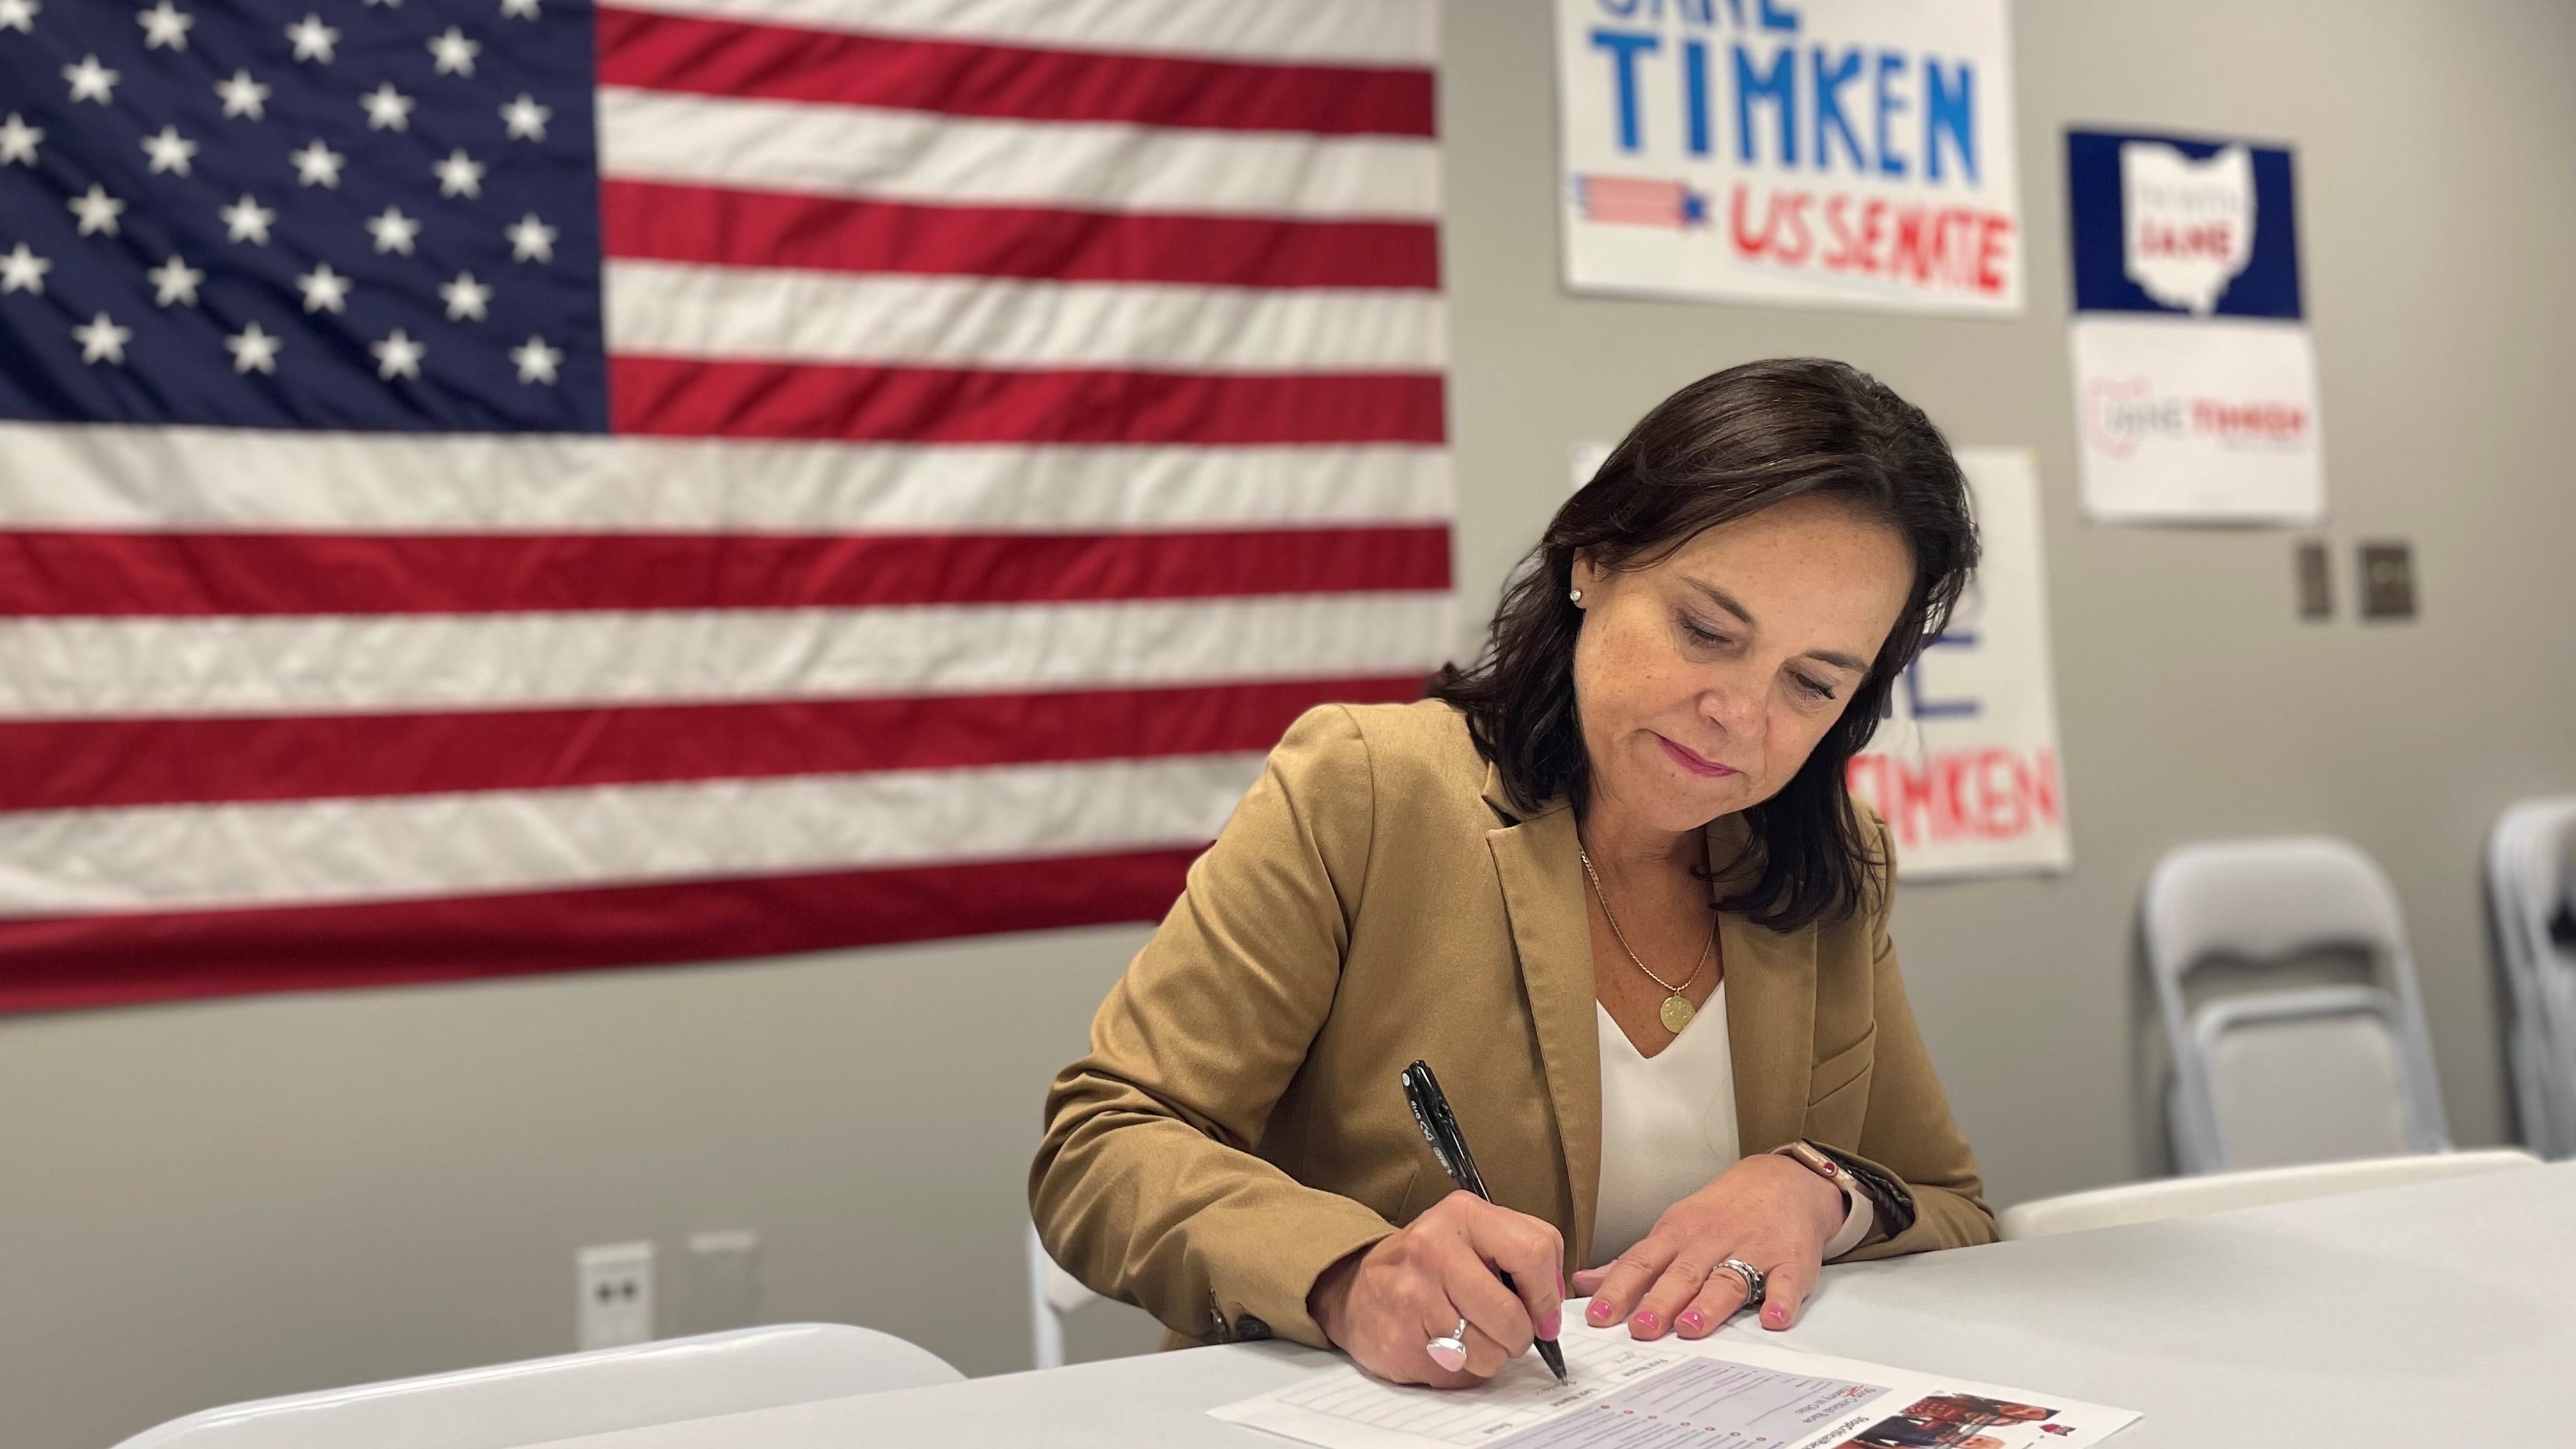 Ohio GOP Senate primary: Timken targets male rivals who 'overcompensate' in trying to showcase Trump support